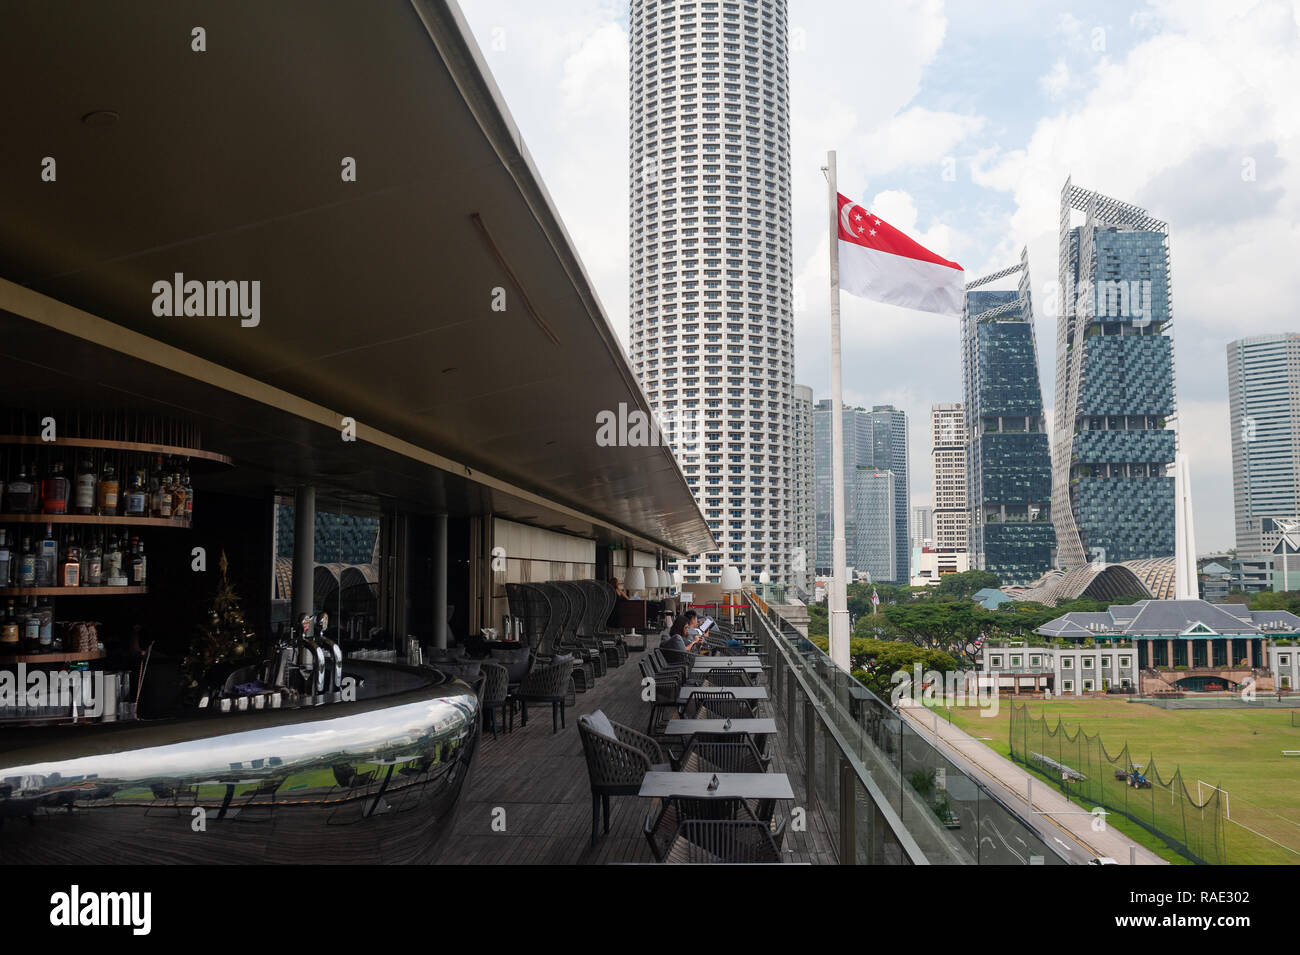 20.12.2018, Singapore, Republic of Singapore, Asia - View from the rooftop terrace at the National Gallery Singapore of the city skyline. Stock Photo